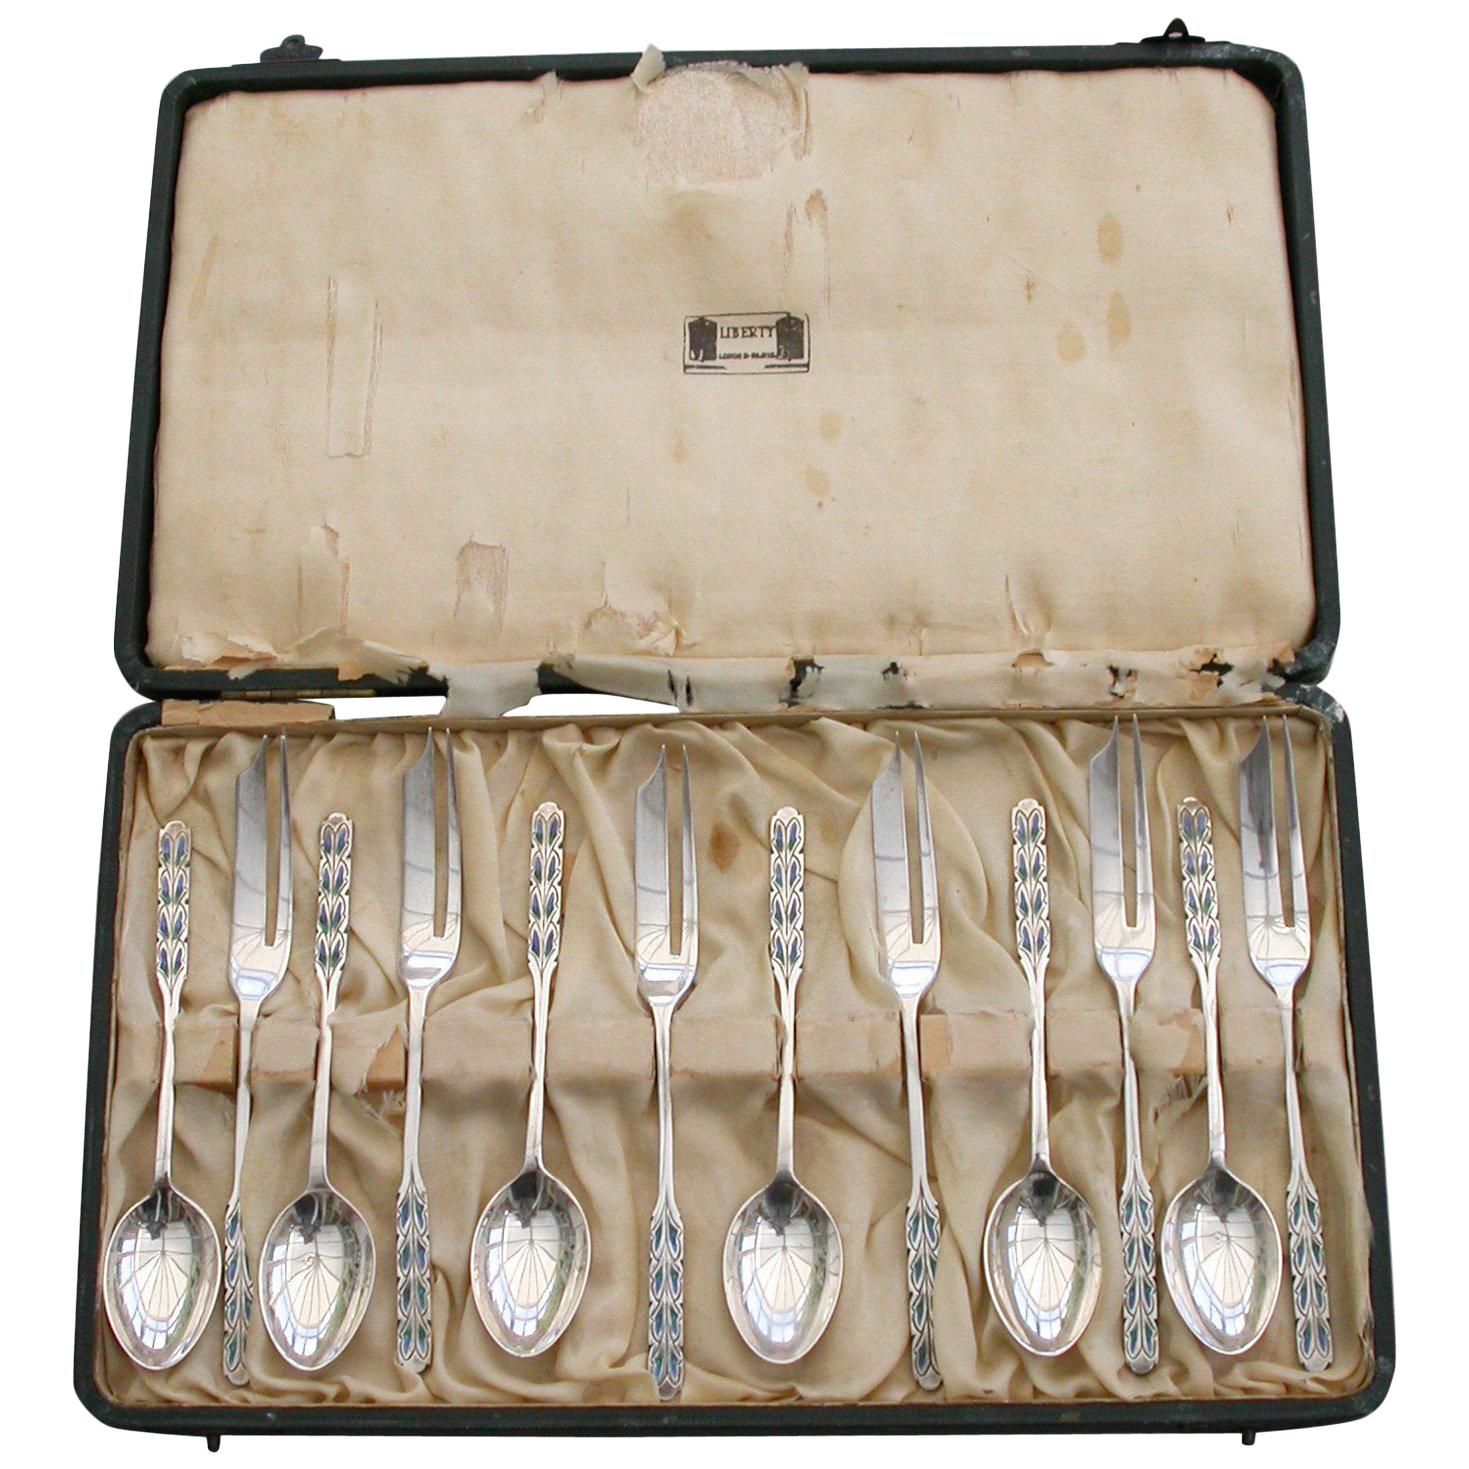 Cased Set 12 Silver and Enamel Pastry Spoons & Forks by Liberty & Co, 1927-1928 For Sale